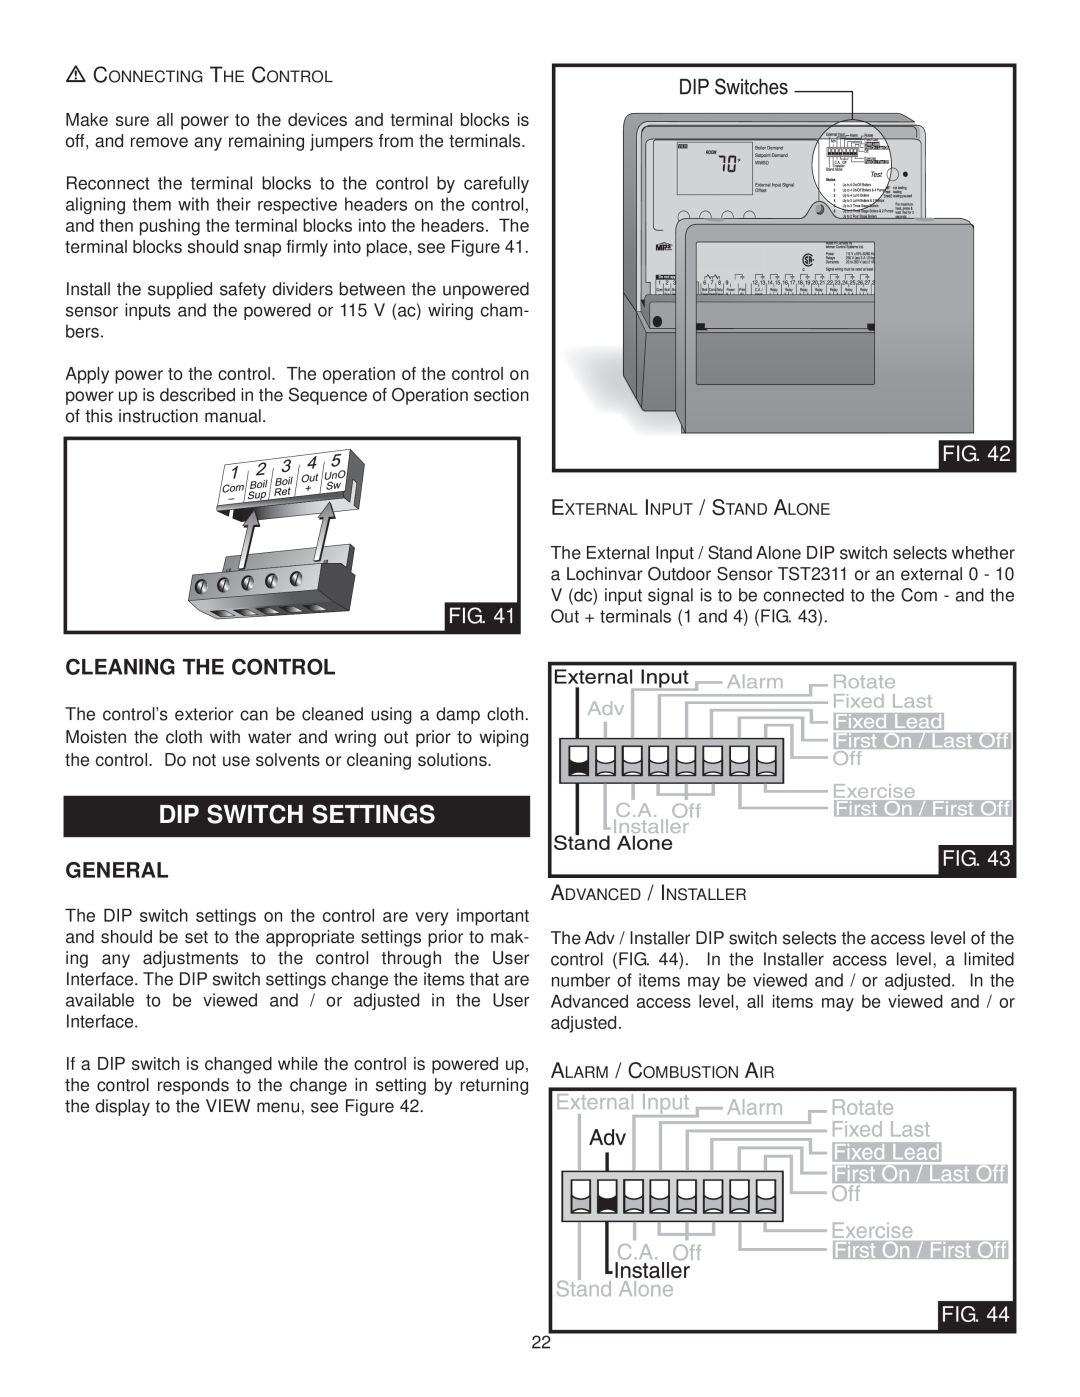 Lochinvar INS7162, MP2, INS7141, TST2313 installation instructions Dip Switch Settings, Cleaning The Control, General 